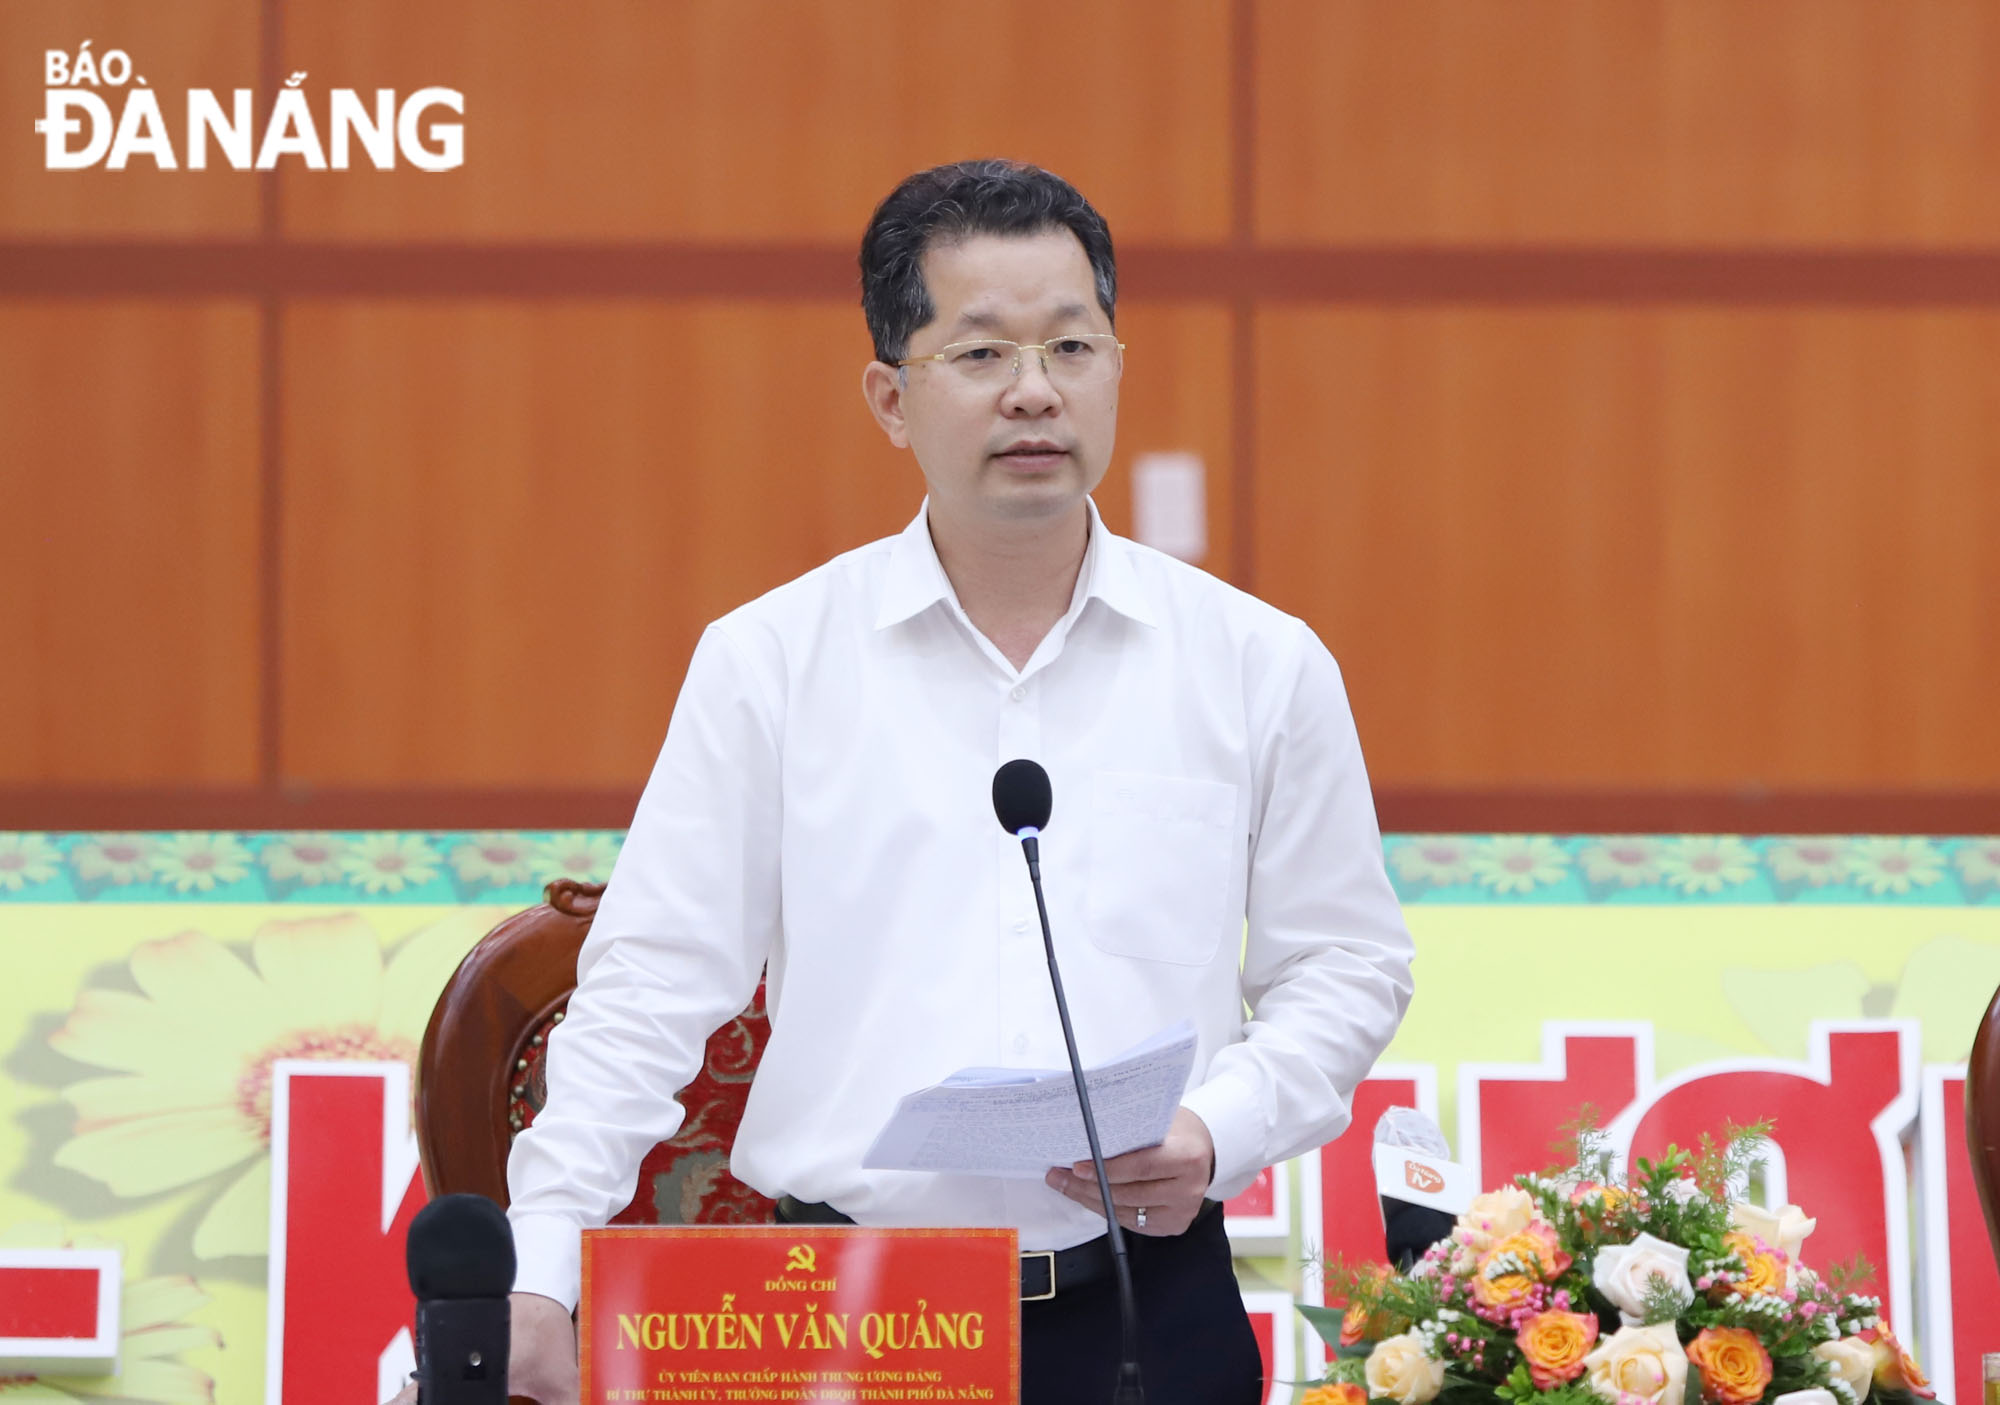 Da Nang Party Committee Secretary Nguyen Van Quang addresses a meeting with the Quang Nam Province leaders on reviewing bilateral cooperation and mutual support over the 5 years, April 25, 2022. Photo: NGOC PHU